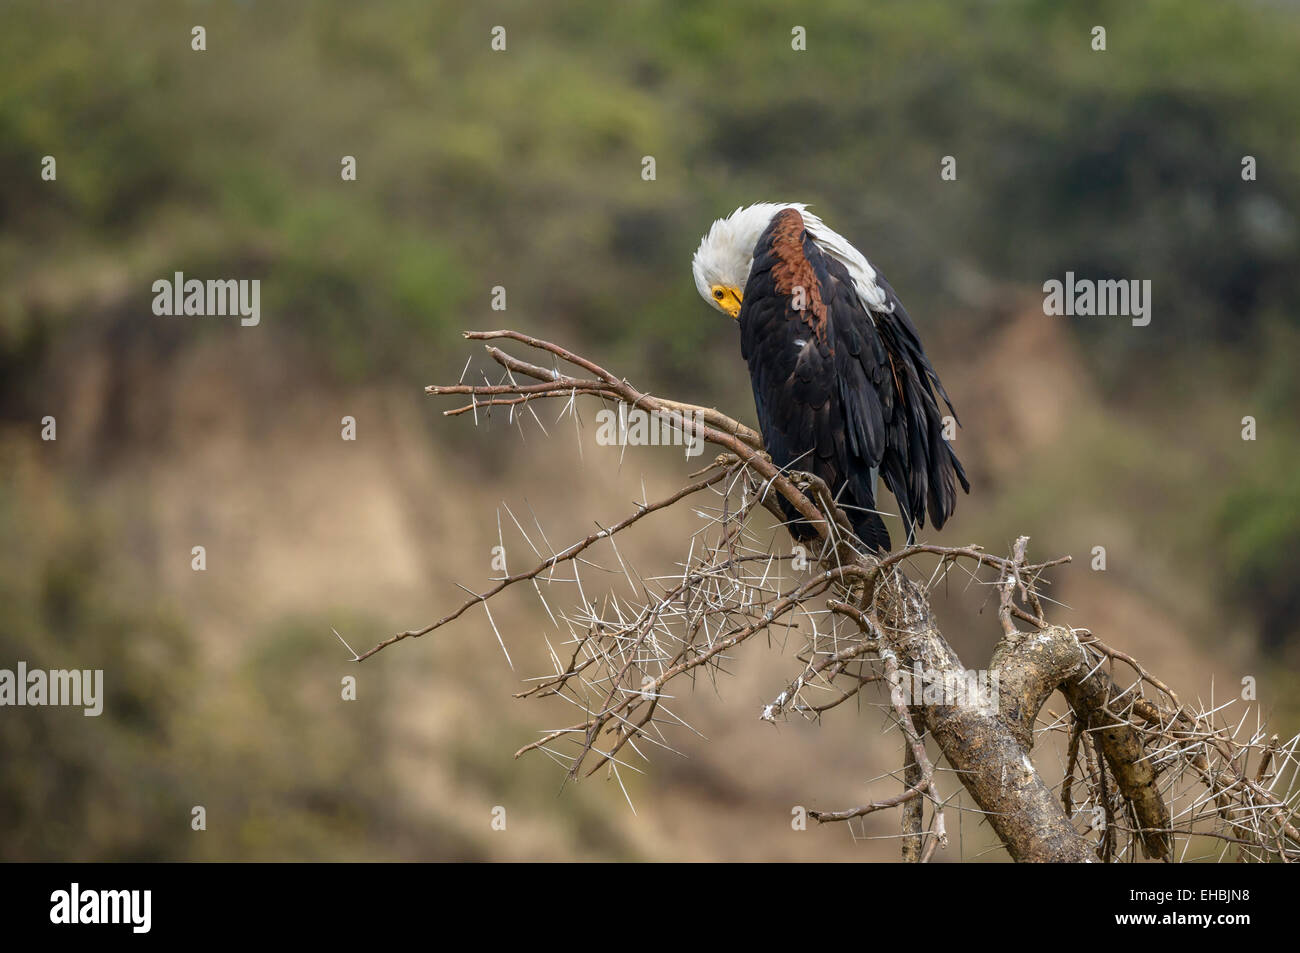 African fish (sea) eagle preening its wing plumage feathers on a bare acacia tree. Horizontal format with copyspace. Stock Photo